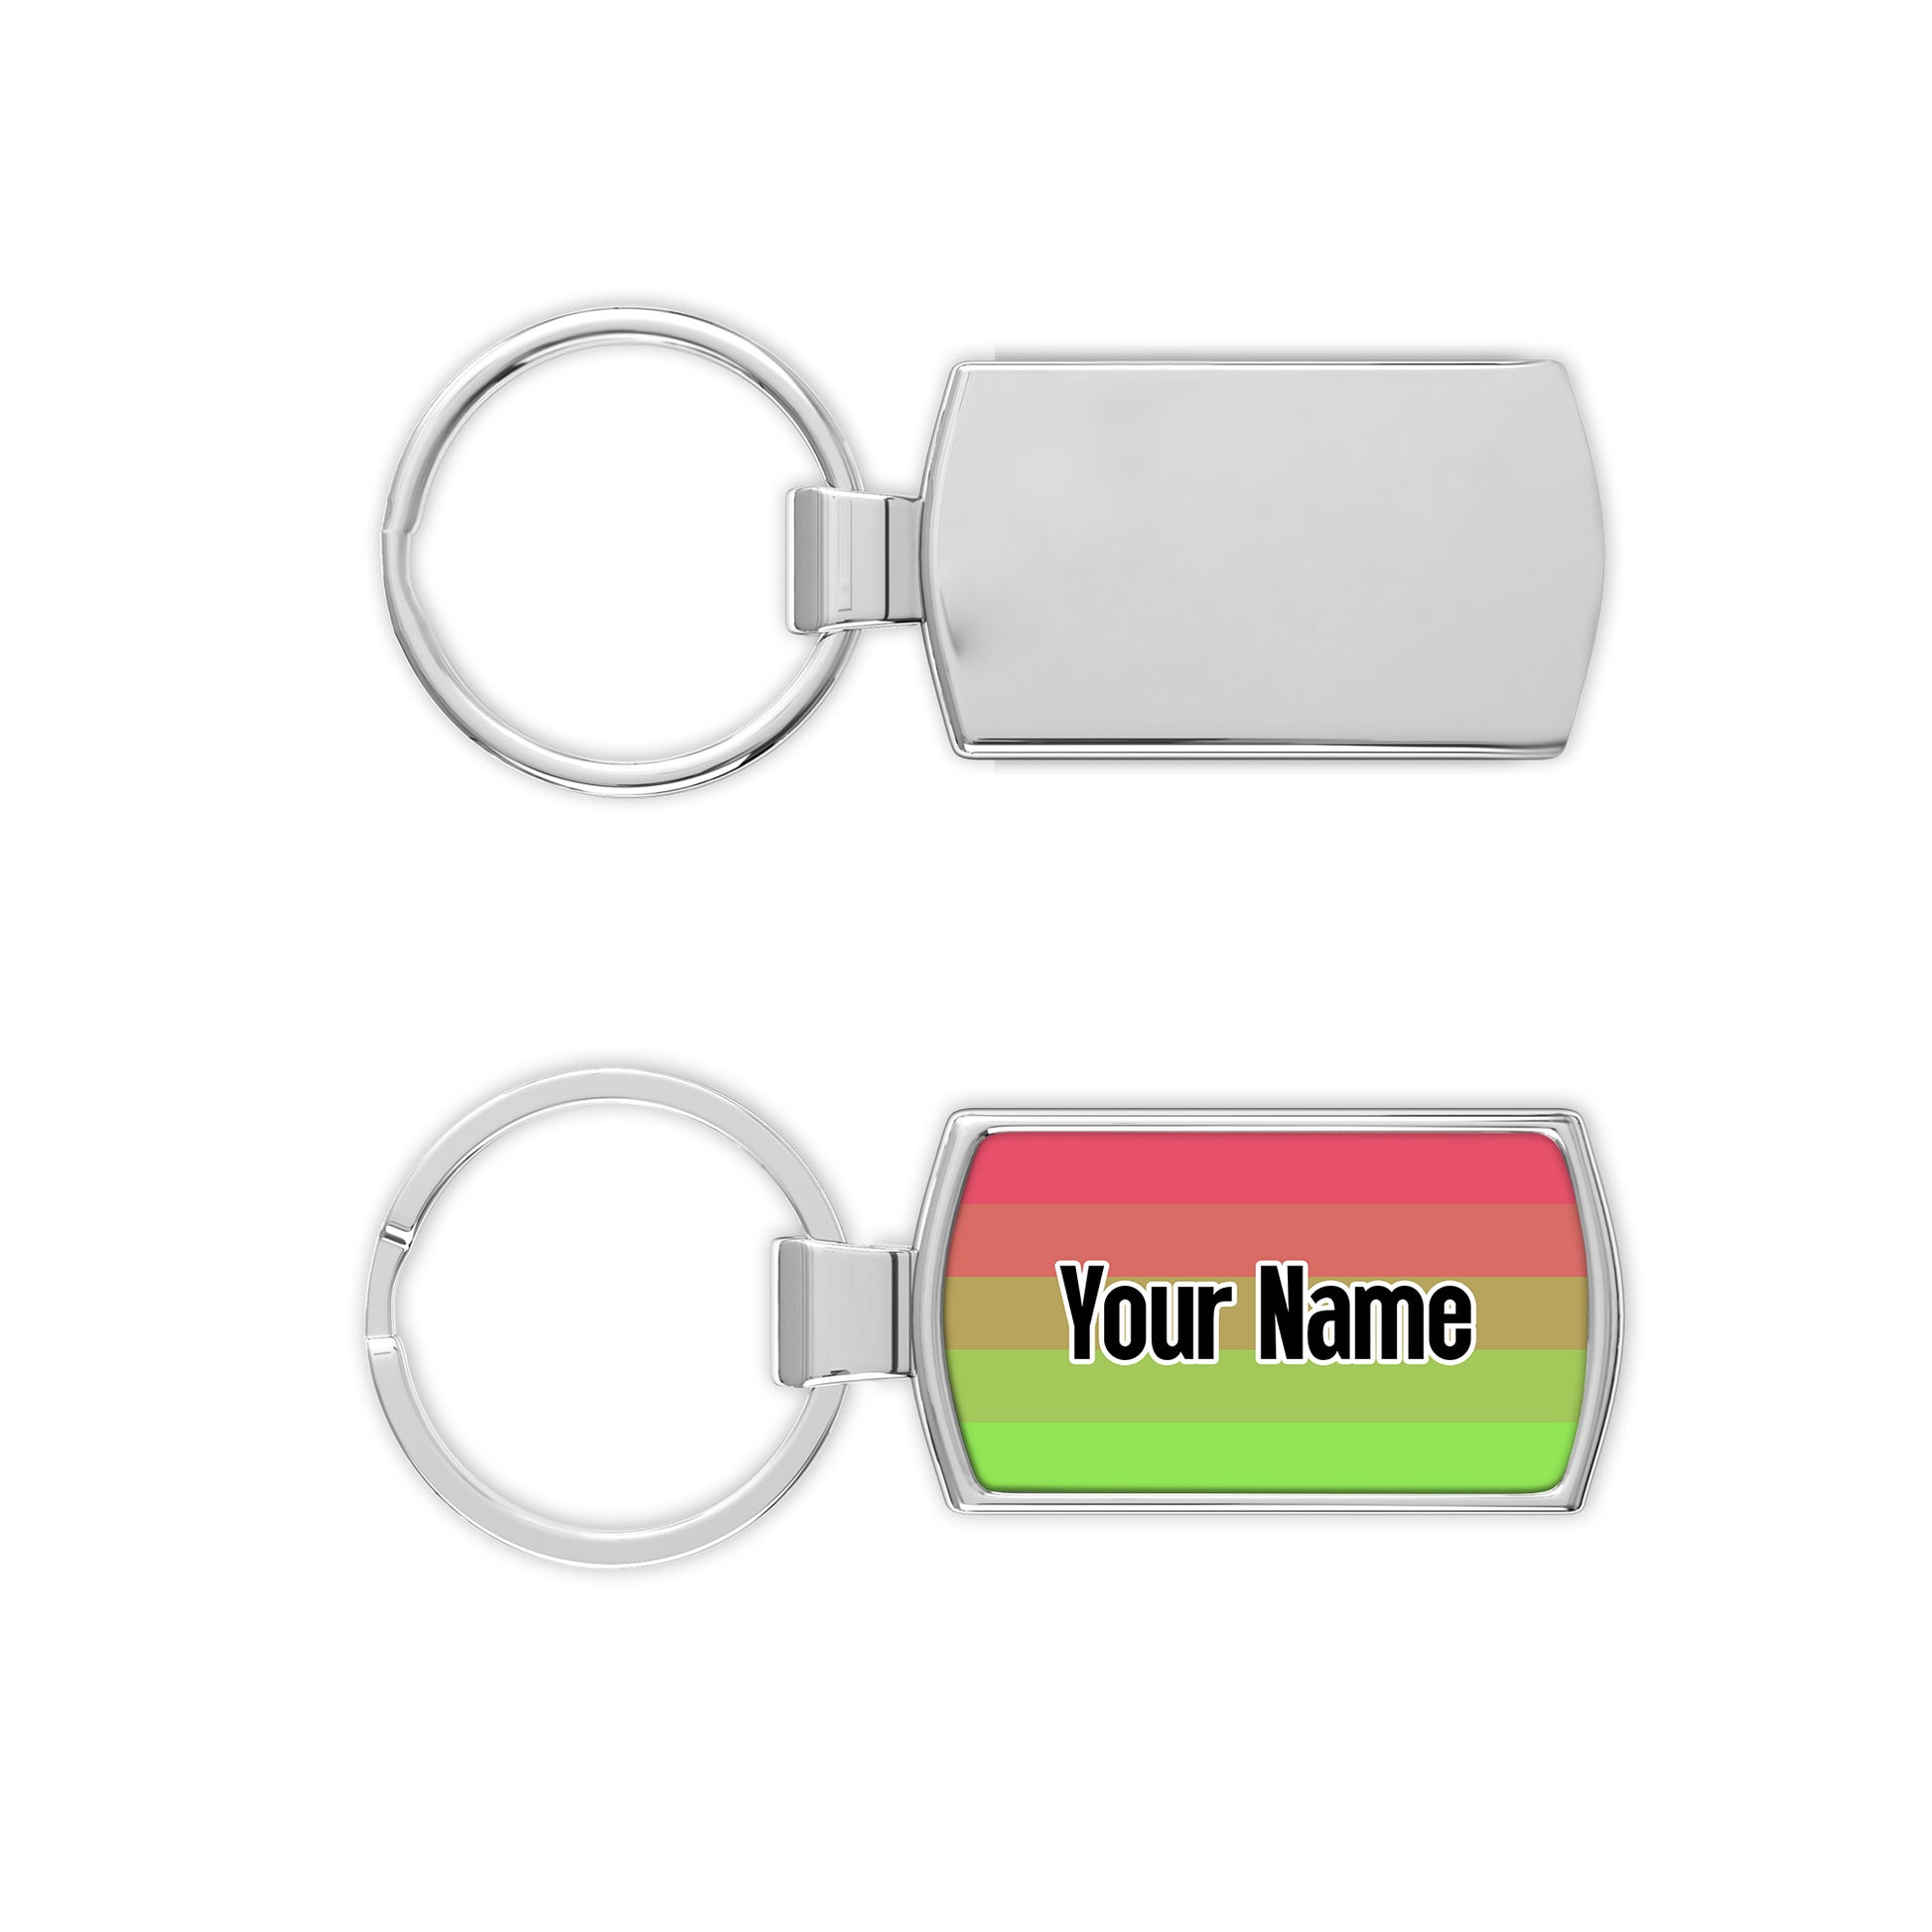 Aroflux pride flag metal keyring or keychain that comes personalised with your name on it